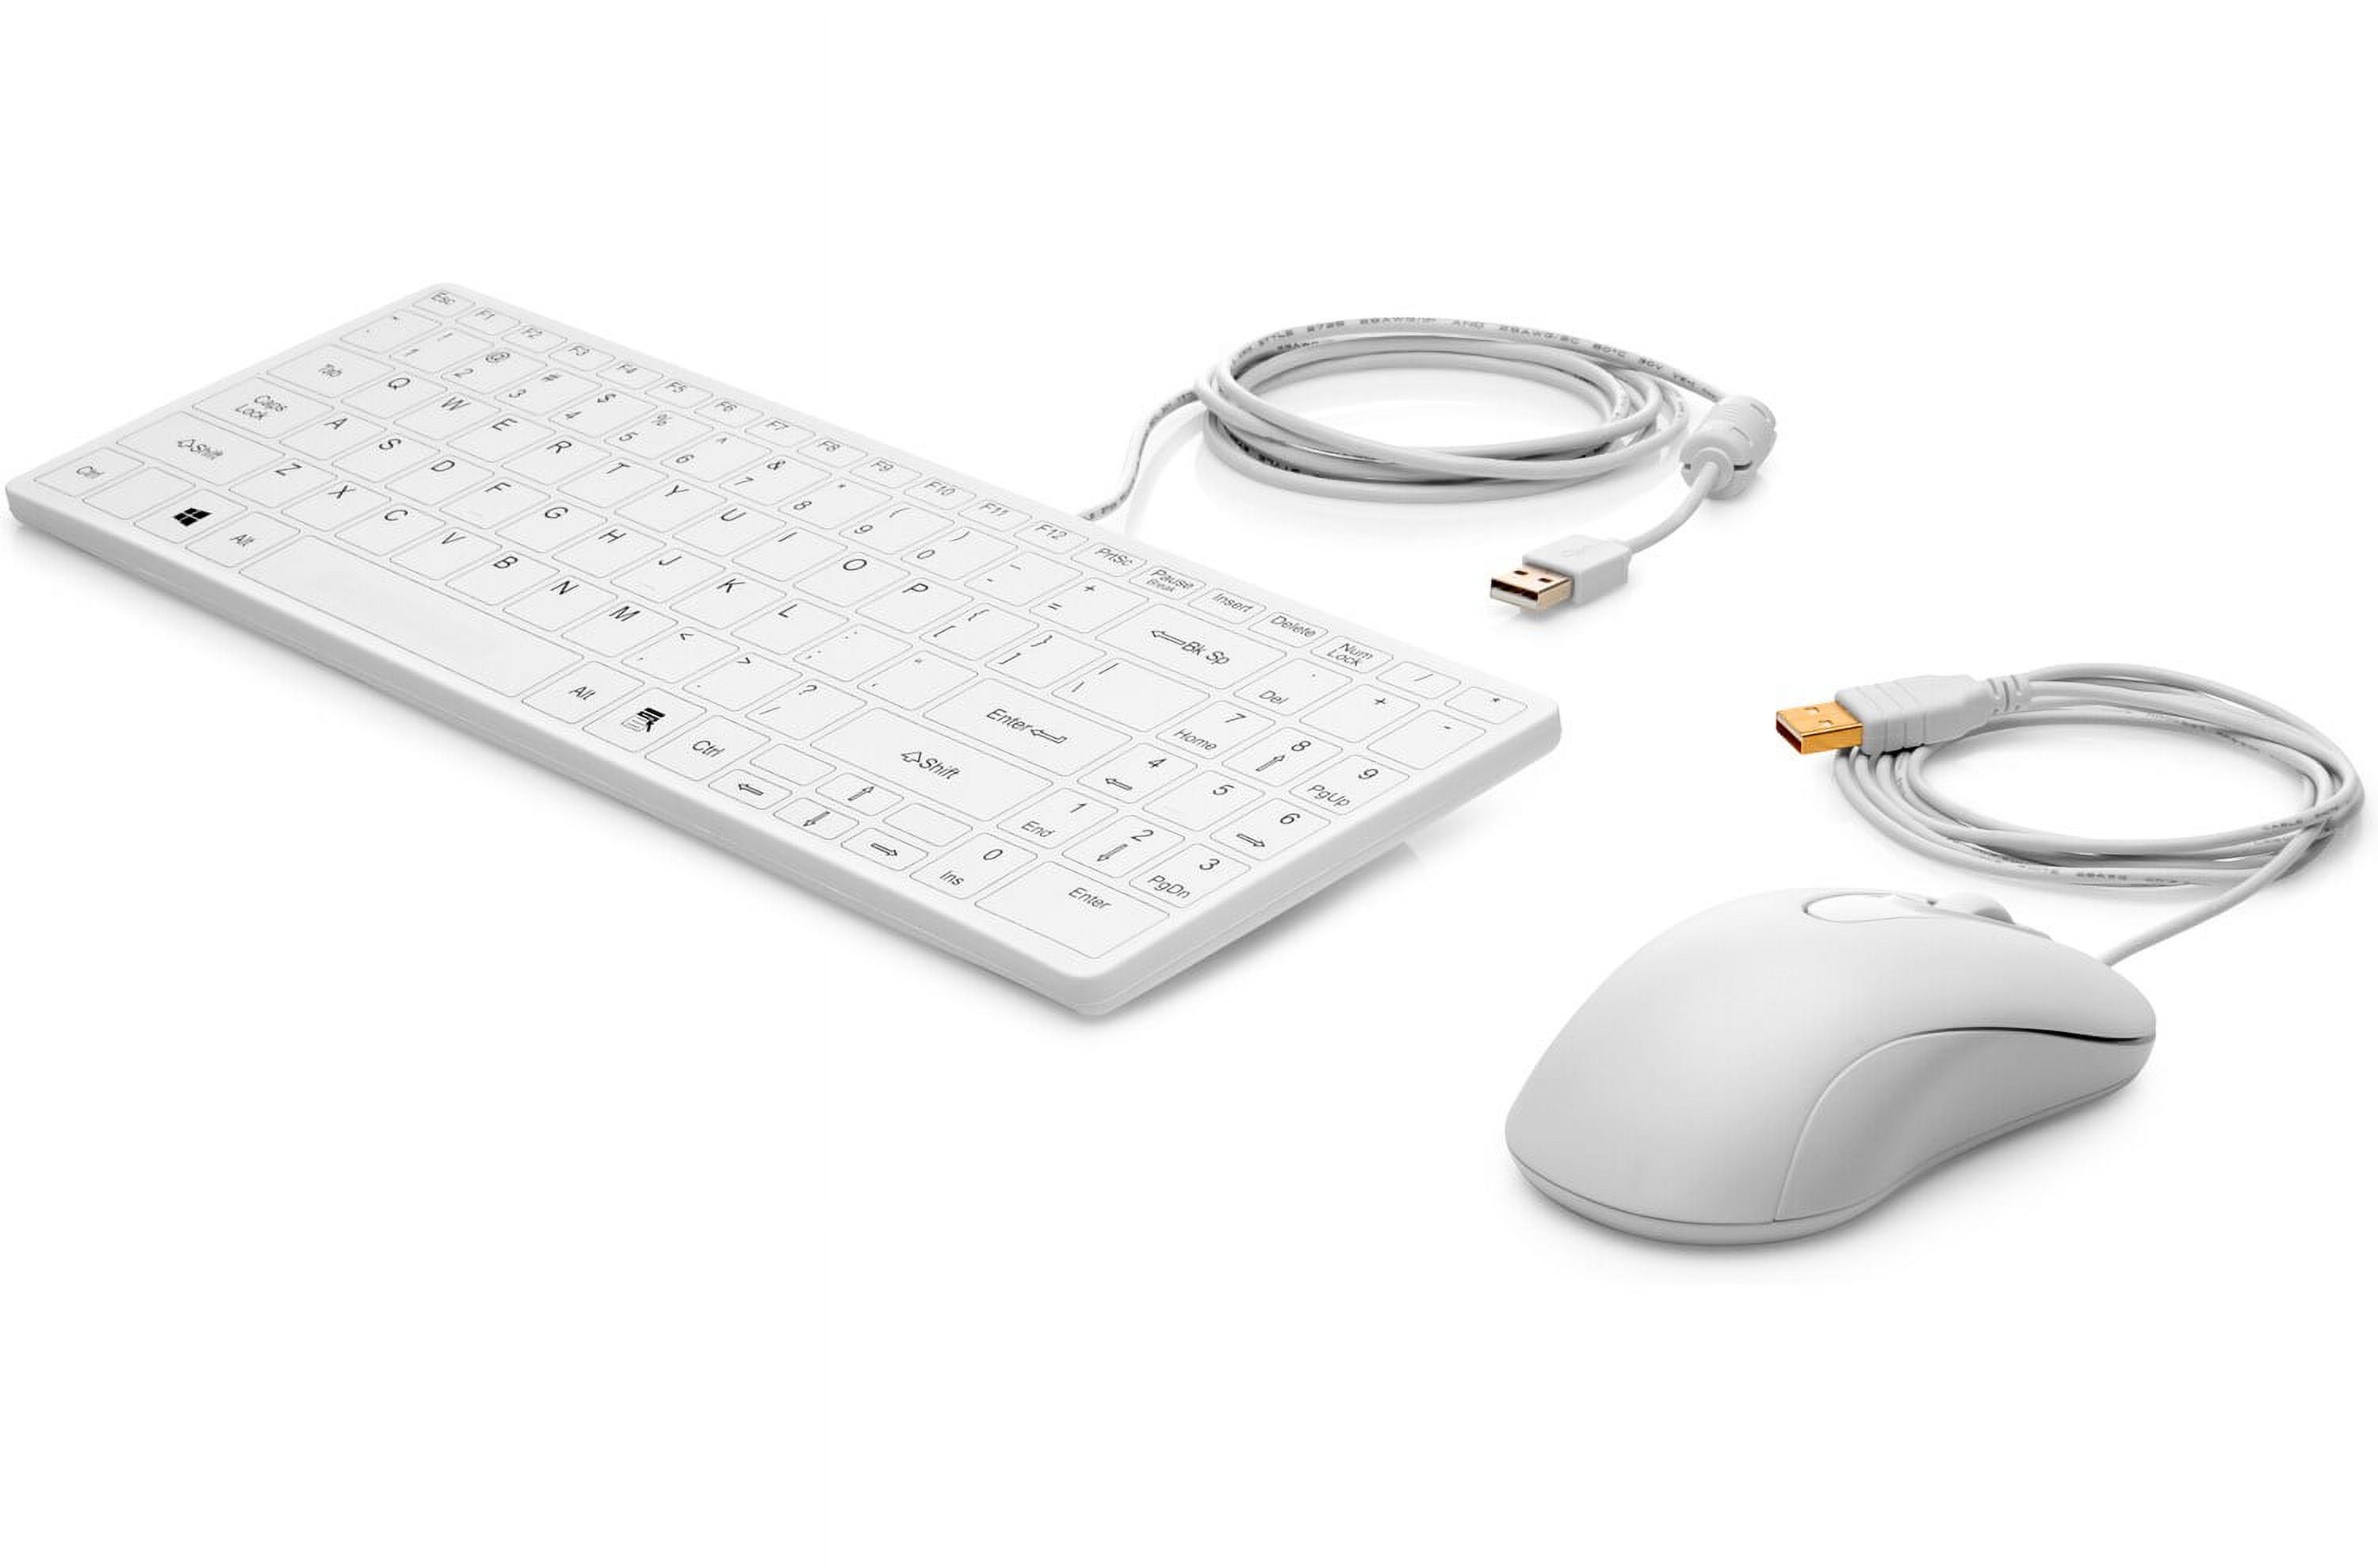 HP USB Keyboard and Mouse Healthcare Edition,Keyboard: USB Type A plug connector; Mouse: USB Type A plug connector (1VD81AA#ABA) - image 1 of 7